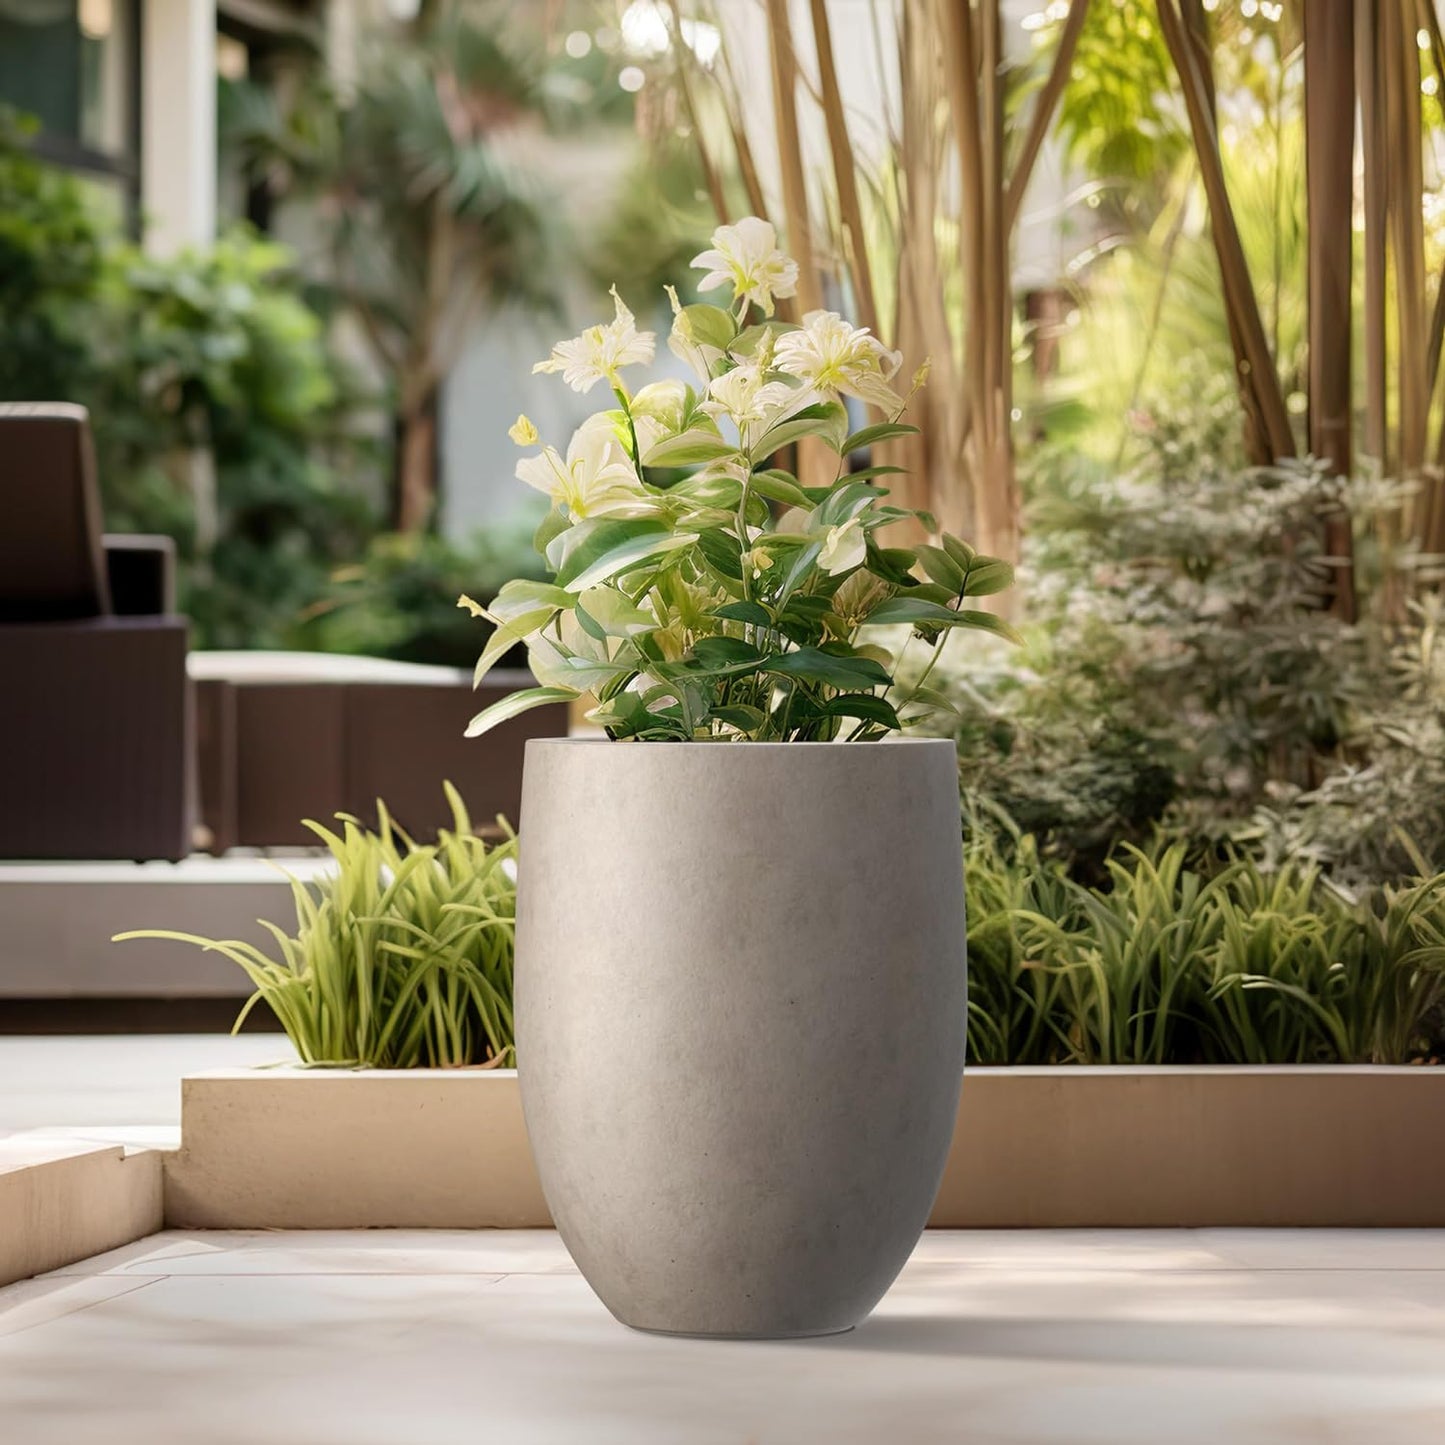 Kante 21.7" H Weathered Concrete Tall Planter, Large Outdoor Indoor Decorative Pot with Drainage Hole and Rubber Plug, Modern Round Style for Home and Garden